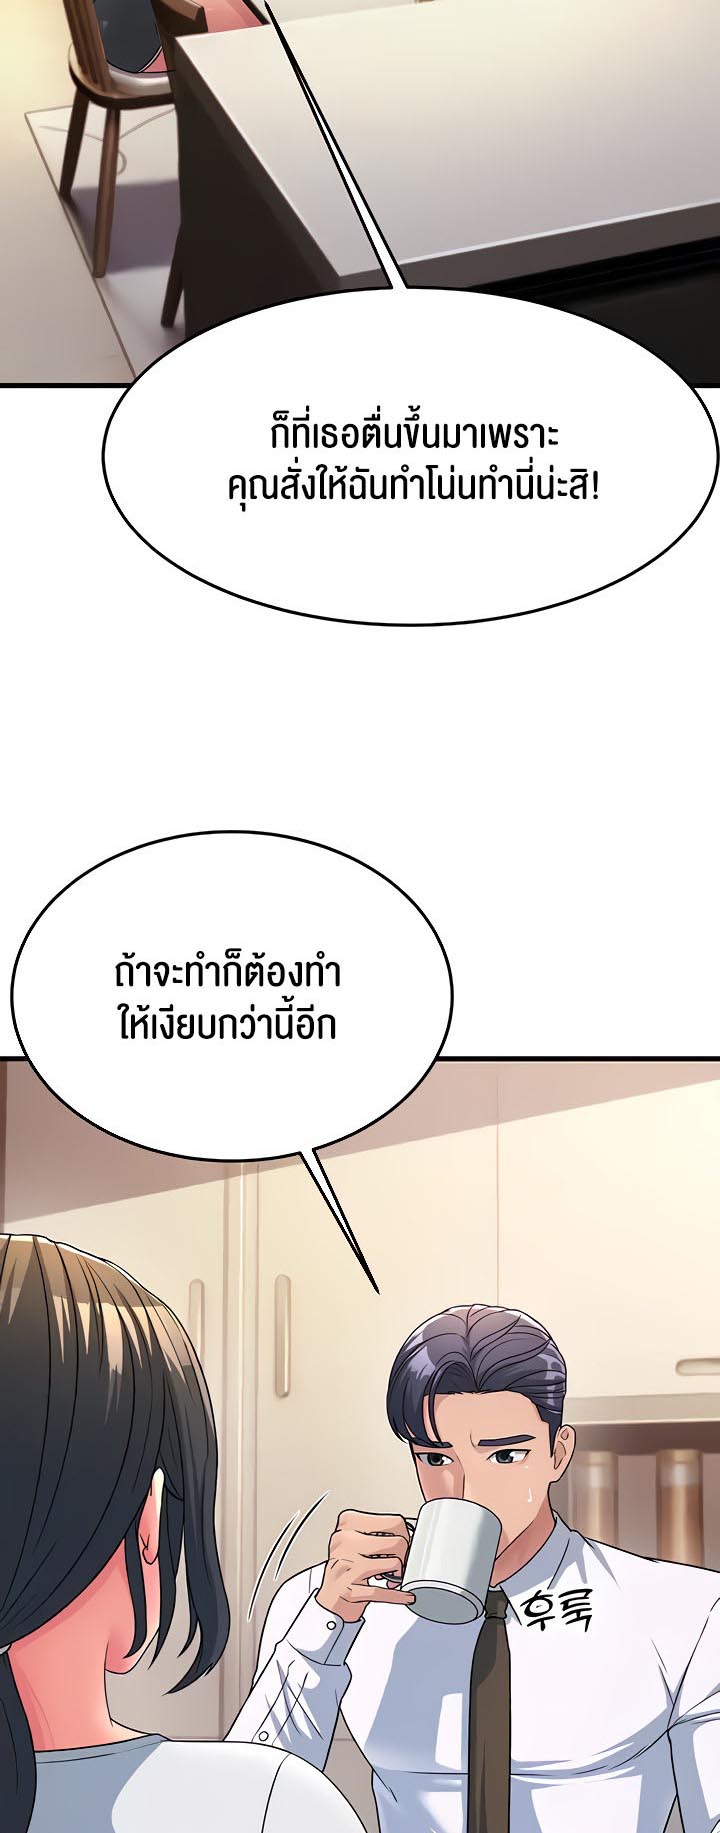 à¸­à¹ˆà¸²à¸™à¹‚à¸”à¸ˆà¸´à¸™ à¹€à¸£à¸·à¹ˆà¸­à¸‡ Mother in Law Bends To My Will 11 10